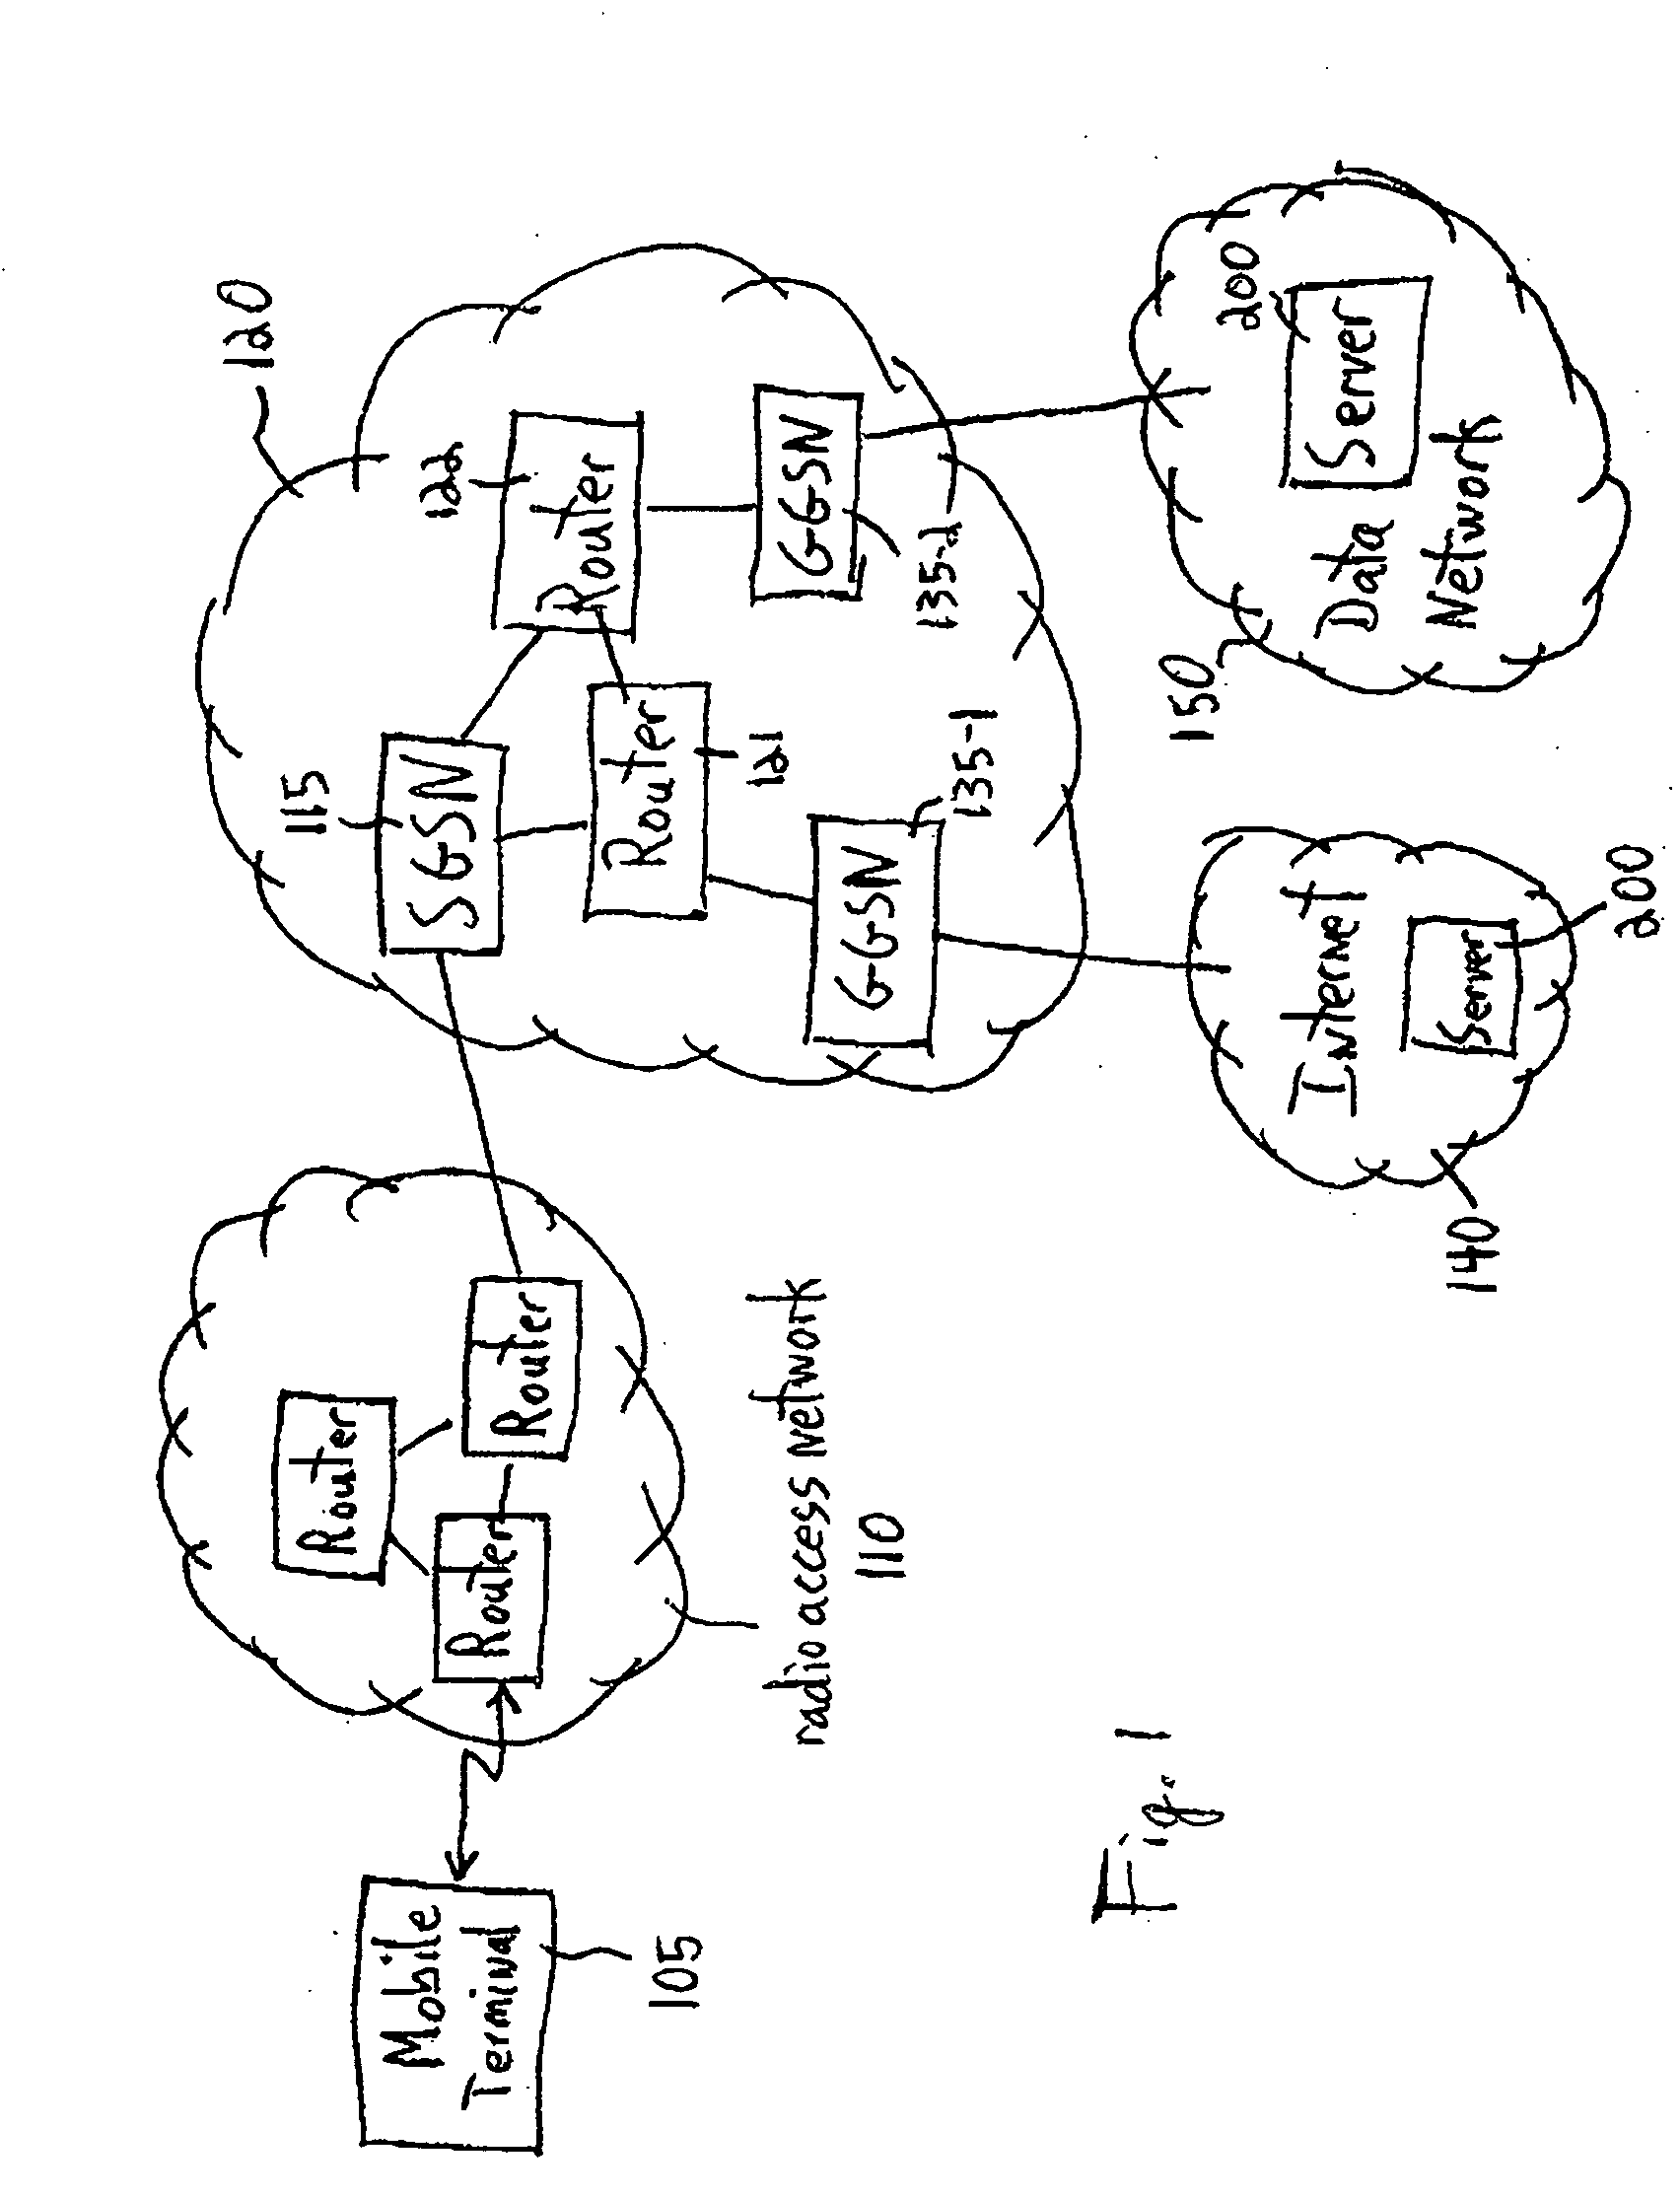 Optimization of a TCP connection